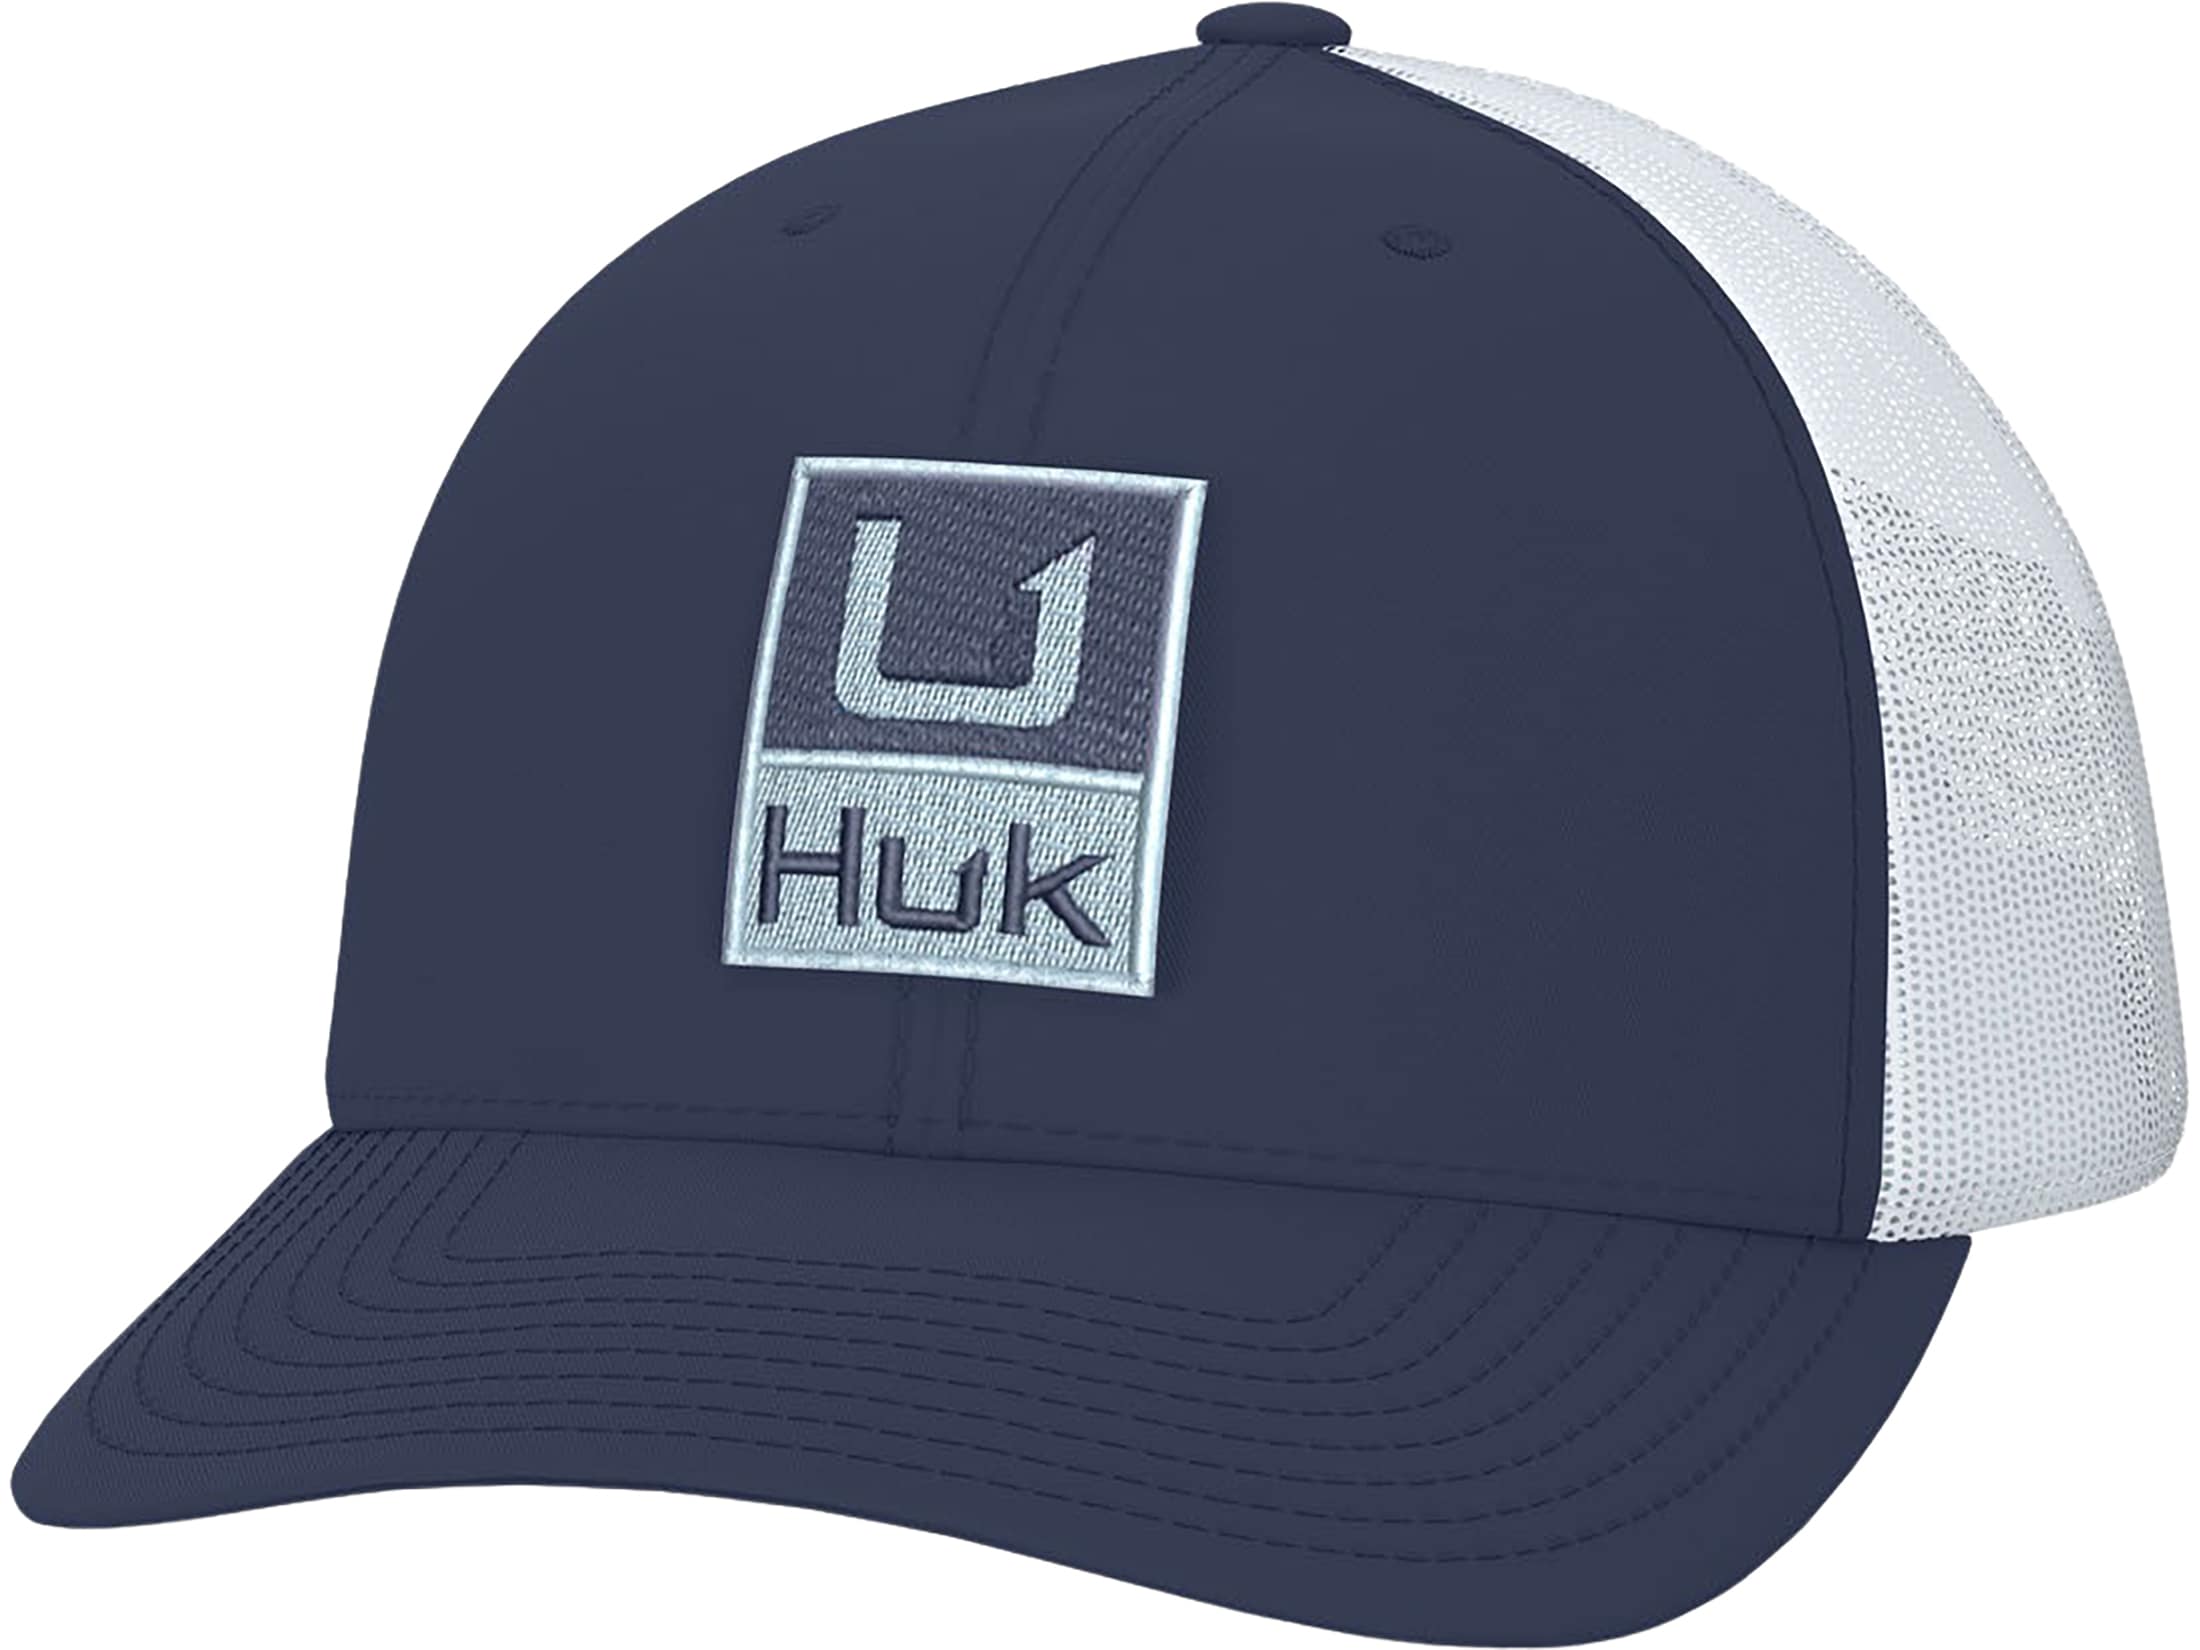 Huk Men's Huk'D Up Trucker Hat Naval Academy One Size Fits Most